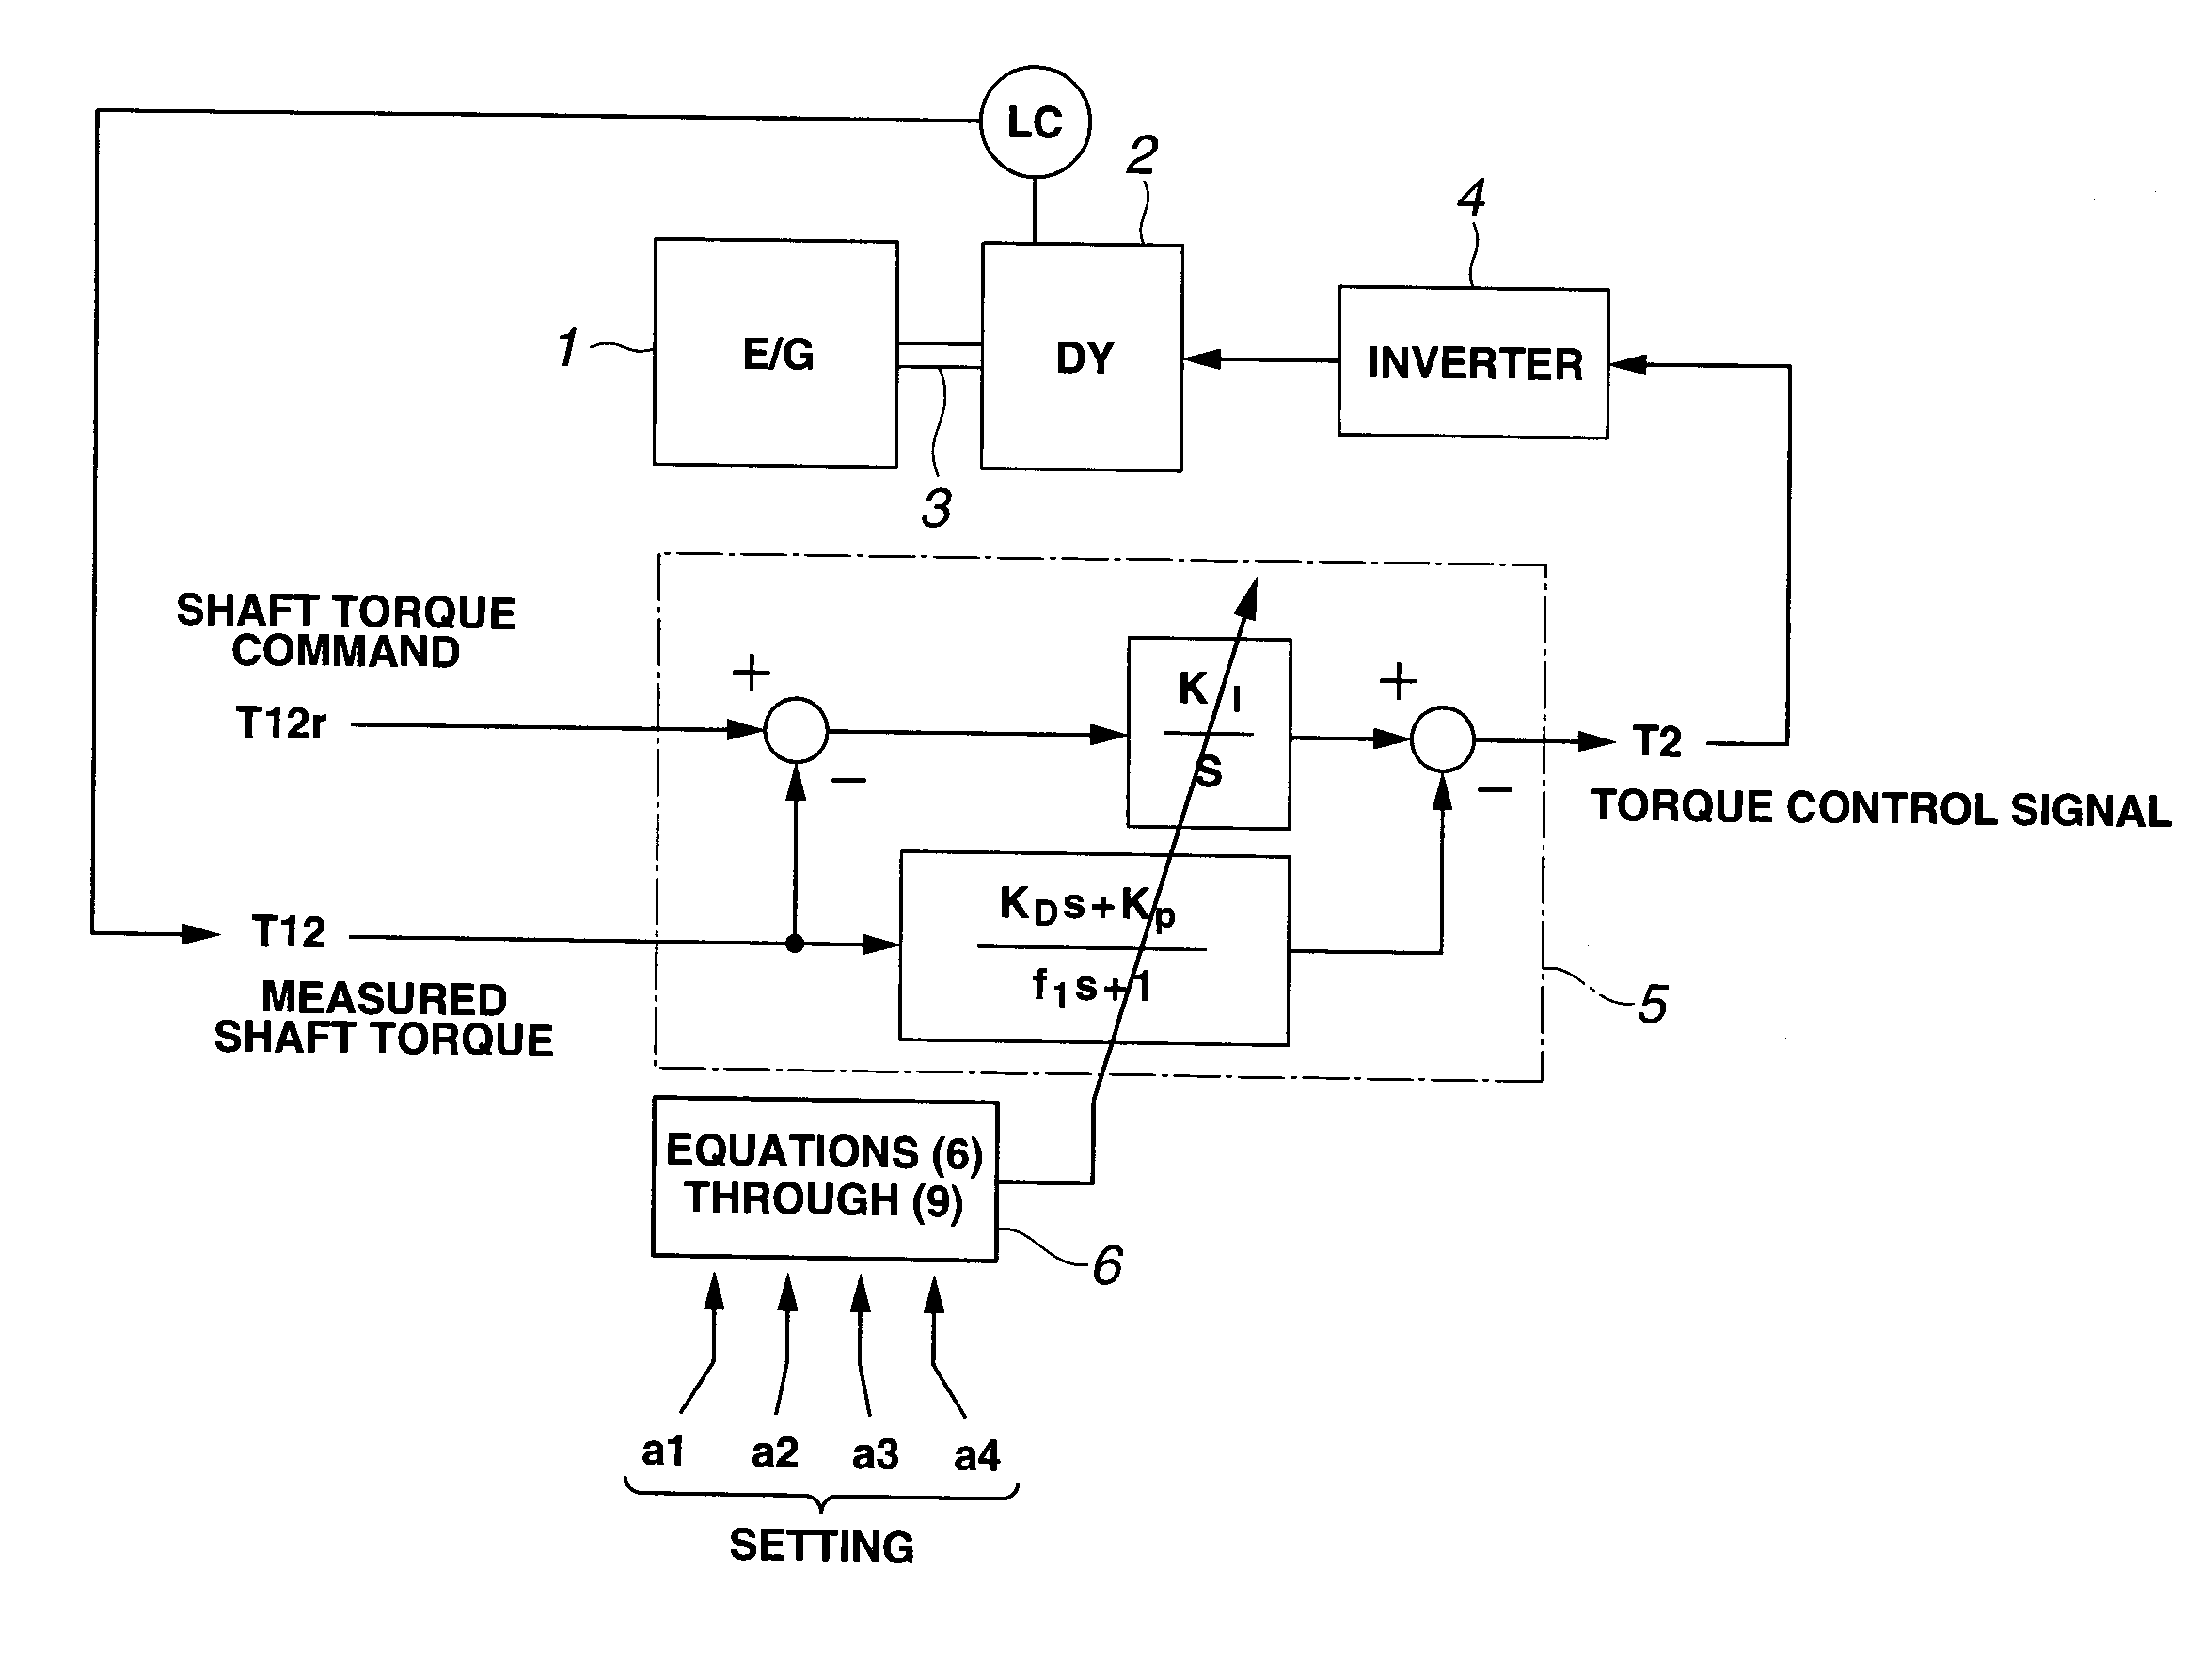 Engine bench system control system